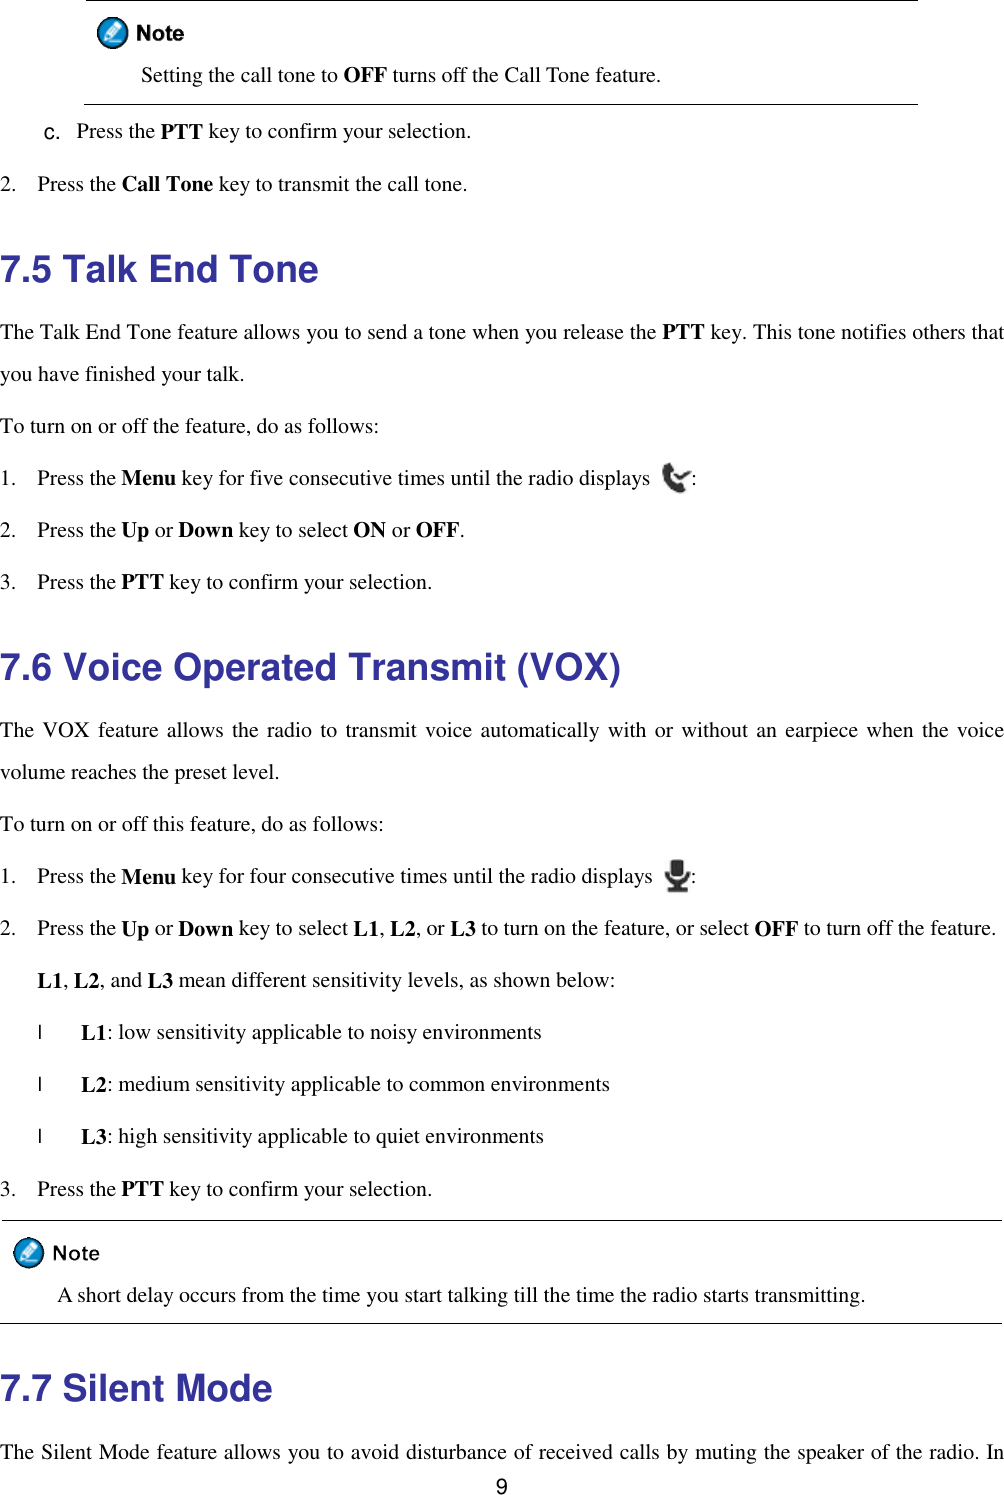  9   Setting the call tone to OFF turns off the Call Tone feature. c.  Press the PTT key to confirm your selection. 2. Press the Call Tone key to transmit the call tone. 7.5 Talk End Tone The Talk End Tone feature allows you to send a tone when you release the PTT key. This tone notifies others that you have finished your talk.  To turn on or off the feature, do as follows: 1. Press the Menu key for five consecutive times until the radio displays  : 2. Press the Up or Down key to select ON or OFF. 3. Press the PTT key to confirm your selection. 7.6 Voice Operated Transmit (VOX) The VOX feature allows the radio to transmit voice automatically with or without an earpiece when the voice volume reaches the preset level. To turn on or off this feature, do as follows: 1. Press the Menu key for four consecutive times until the radio displays  : 2. Press the Up or Down key to select L1, L2, or L3 to turn on the feature, or select OFF to turn off the feature. L1, L2, and L3 mean different sensitivity levels, as shown below: l L1: low sensitivity applicable to noisy environments l L2: medium sensitivity applicable to common environments l L3: high sensitivity applicable to quiet environments 3. Press the PTT key to confirm your selection.  A short delay occurs from the time you start talking till the time the radio starts transmitting. 7.7 Silent Mode The Silent Mode feature allows you to avoid disturbance of received calls by muting the speaker of the radio. In 